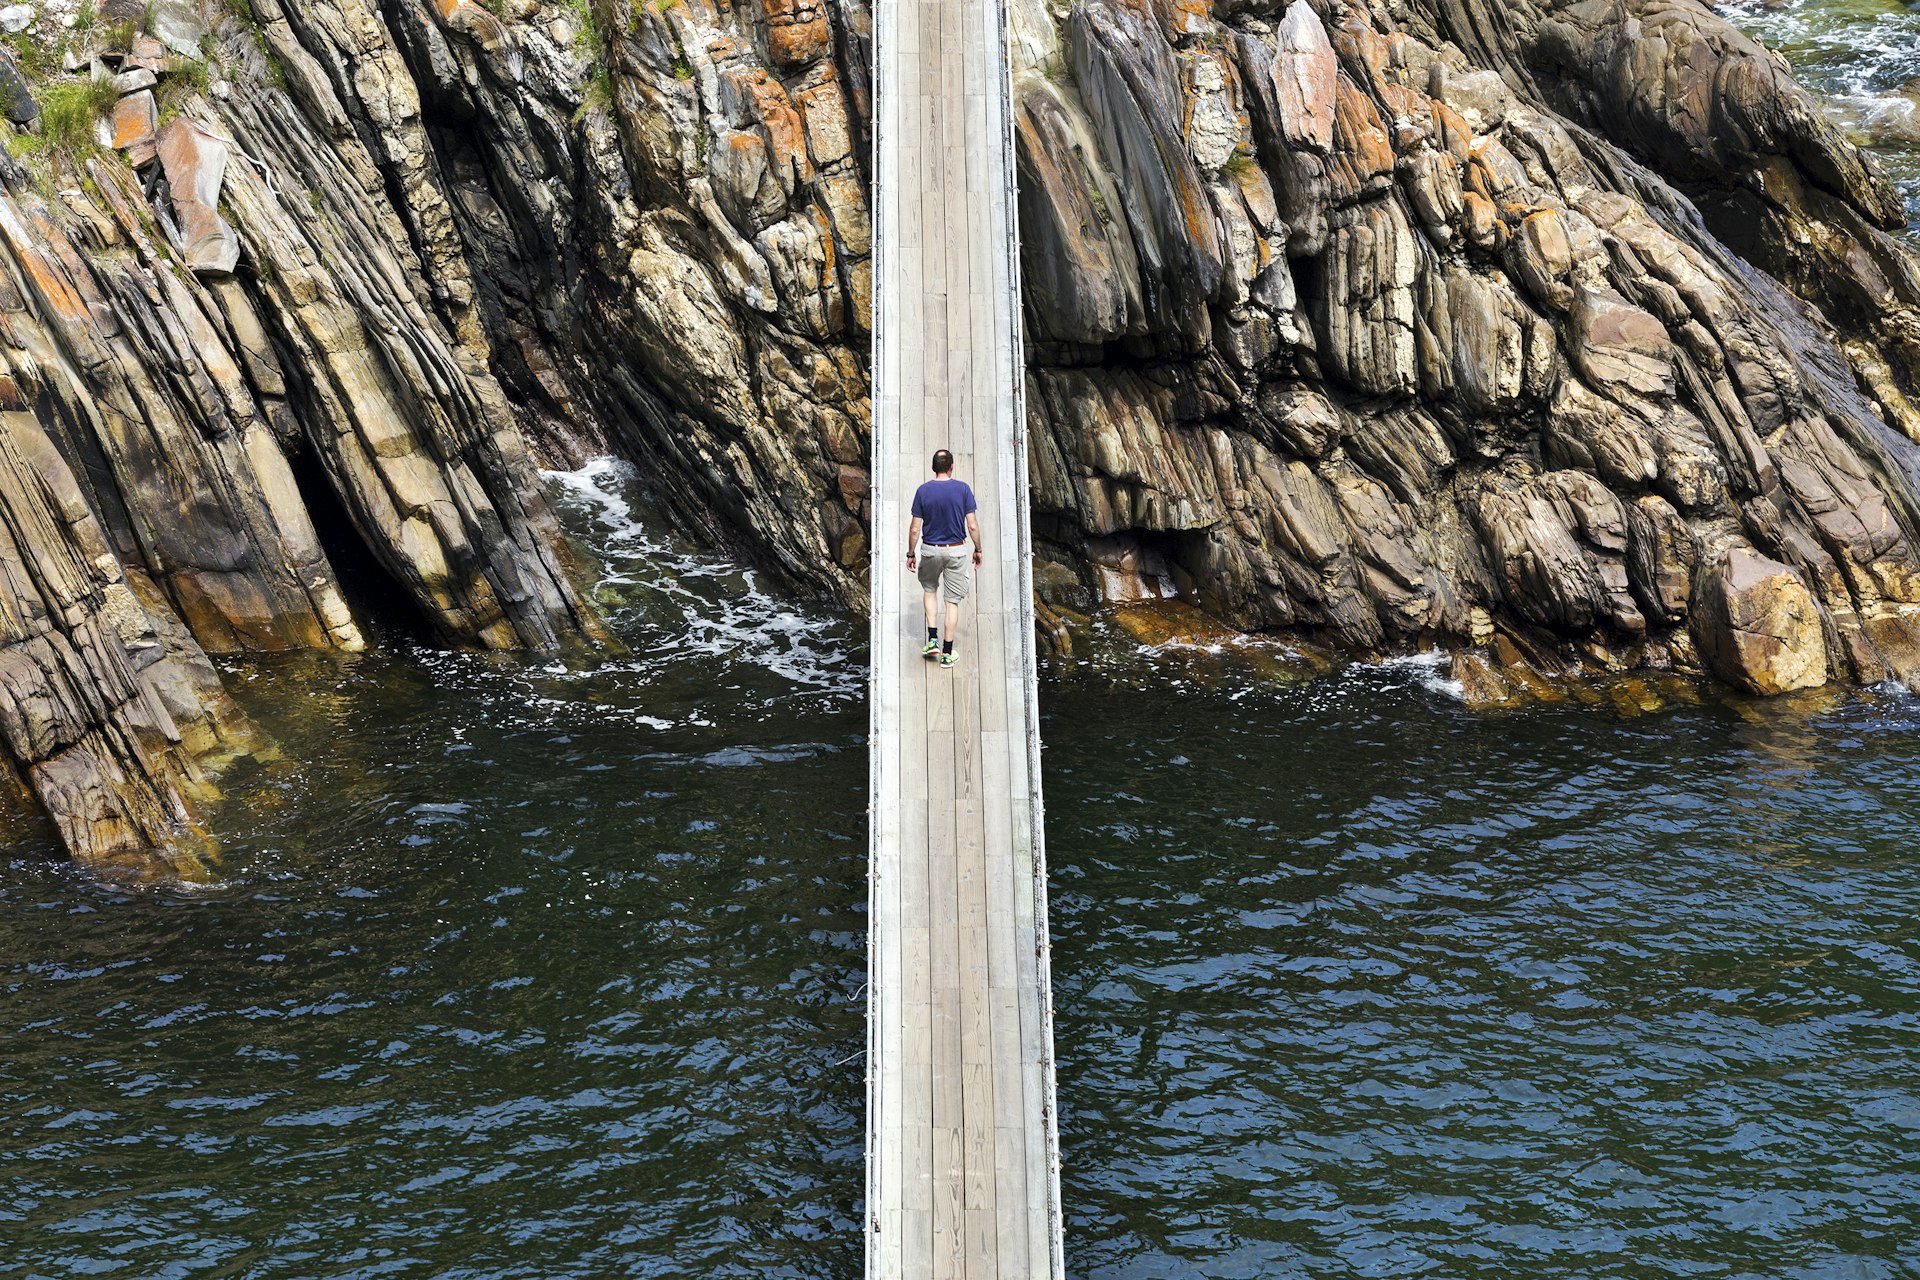 A man walking on wooden bridge across an inlet bound by striated rocky shores.